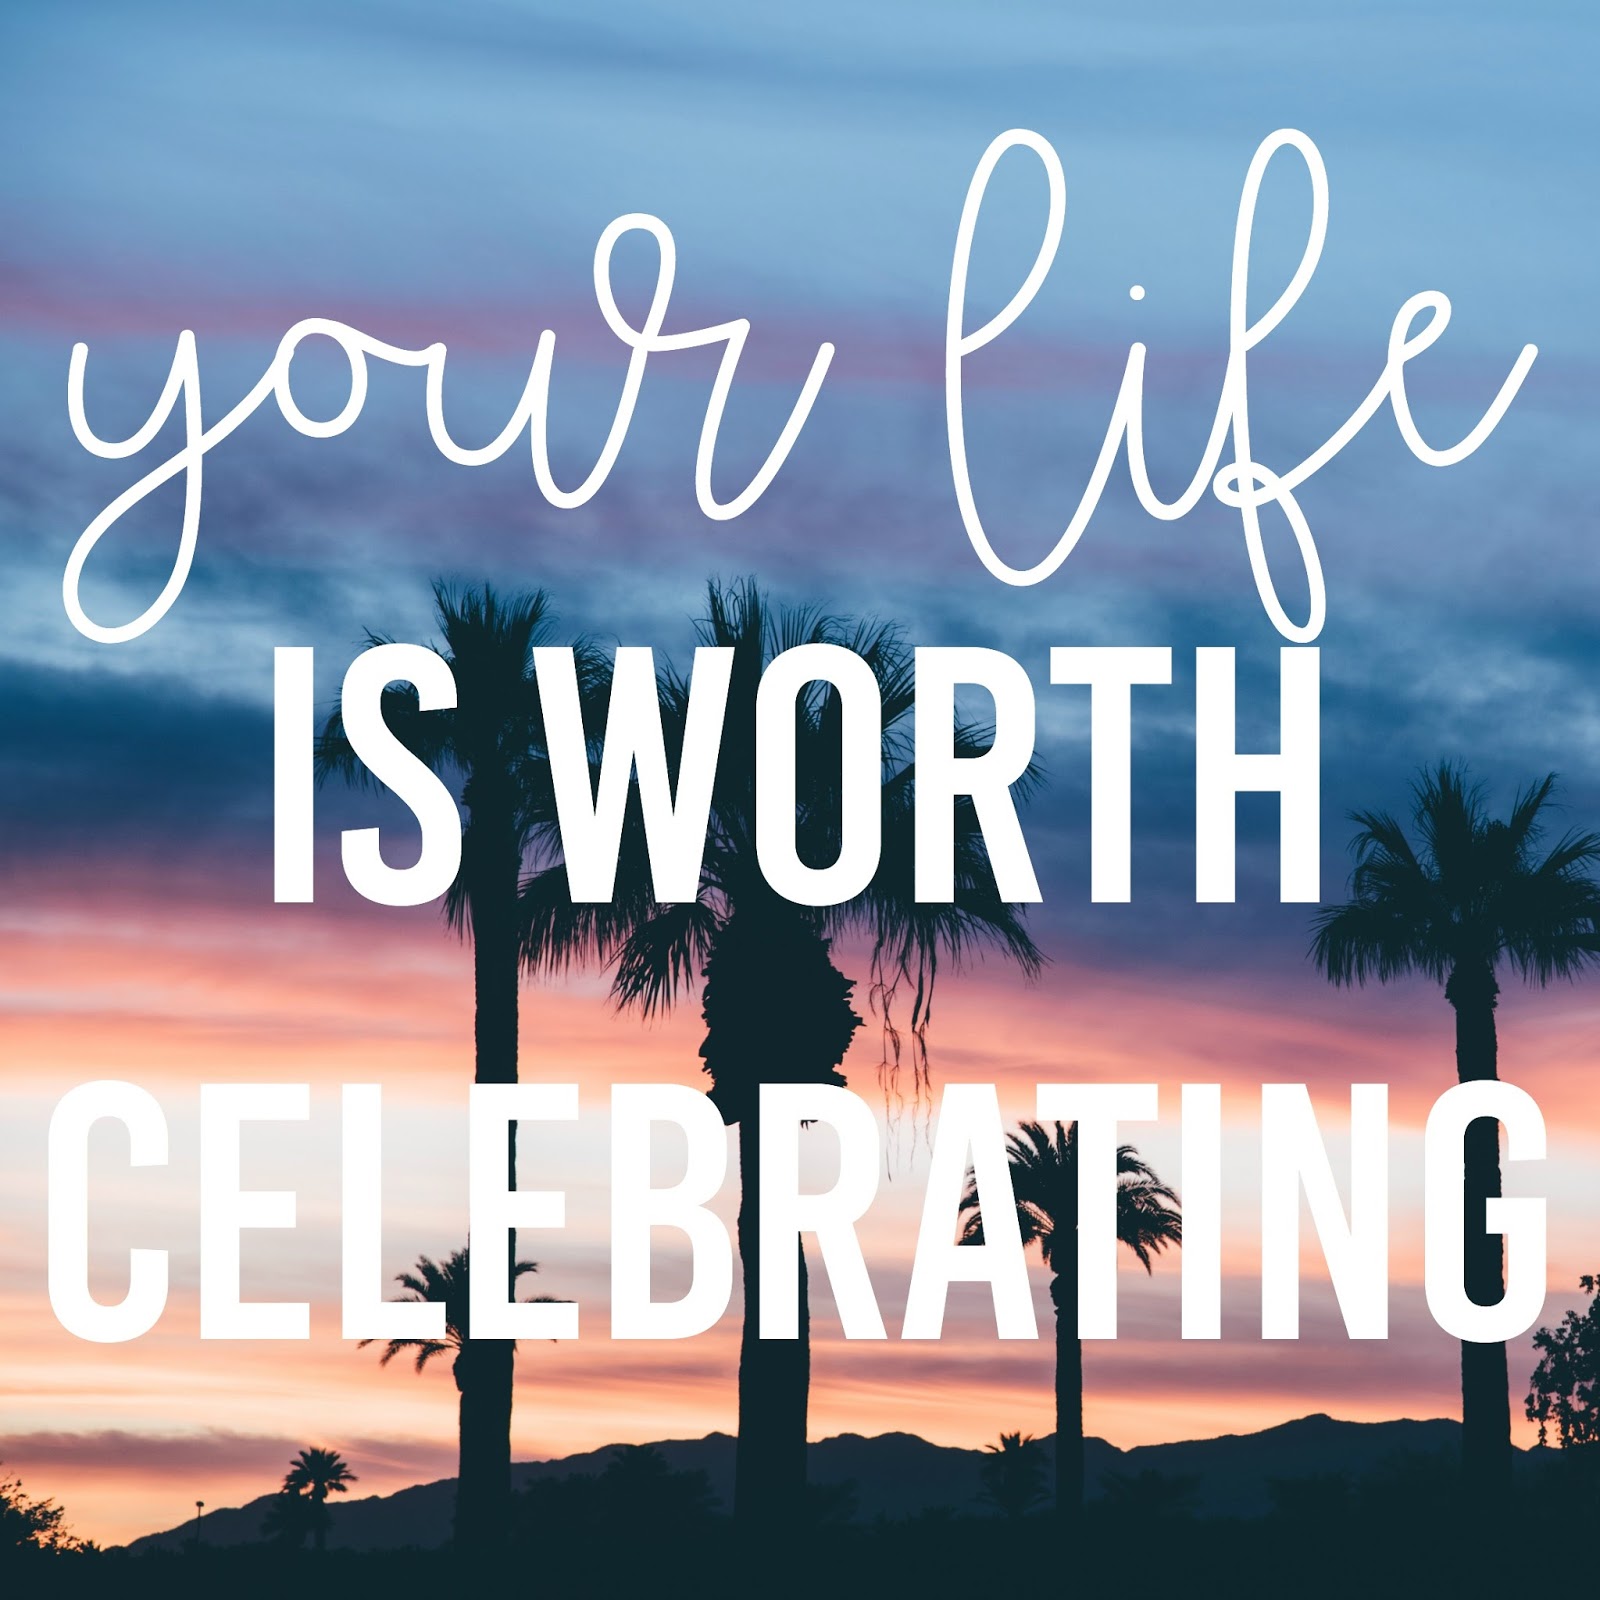 your-life-is-worth-celebrating-the-girl-who-loved-to-write-about-life